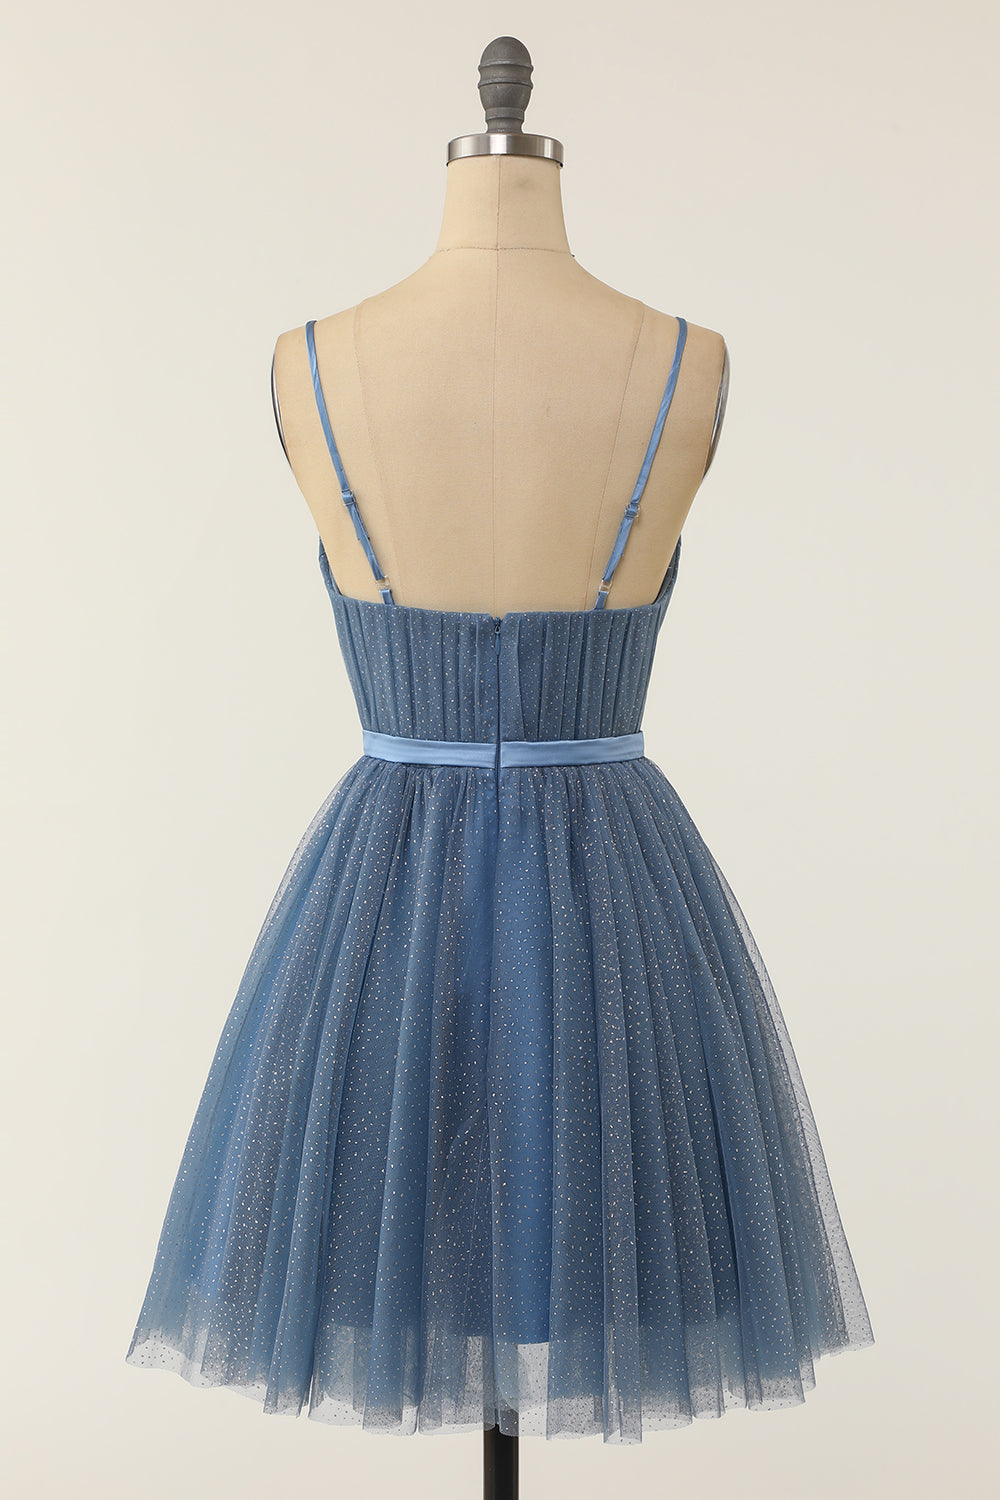 Smoky Blue Tulle Spaghetti Strap A-Line Homecoming Dress